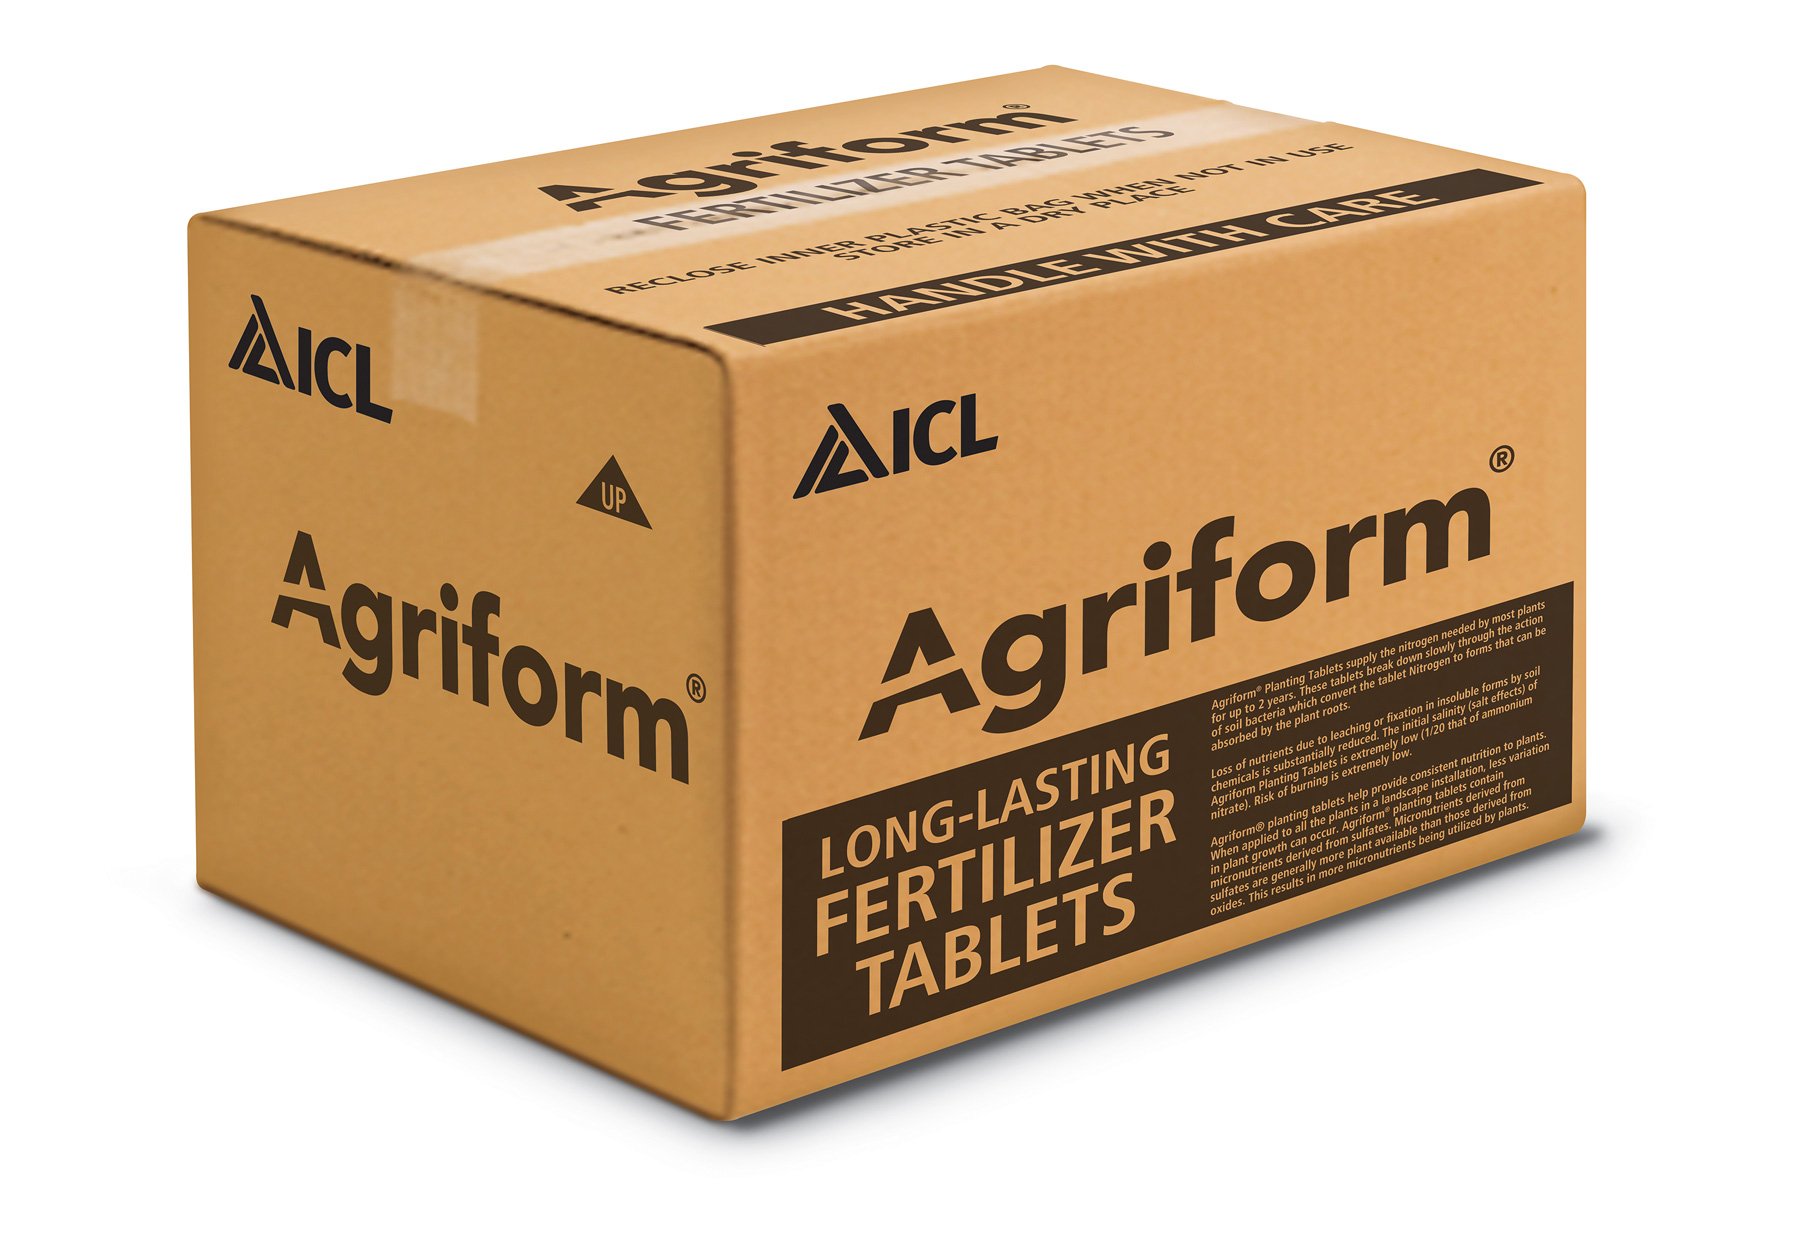 Agriform 20-10-5 1-2yrs 10 gram 1000/case - Controlled Release CRF